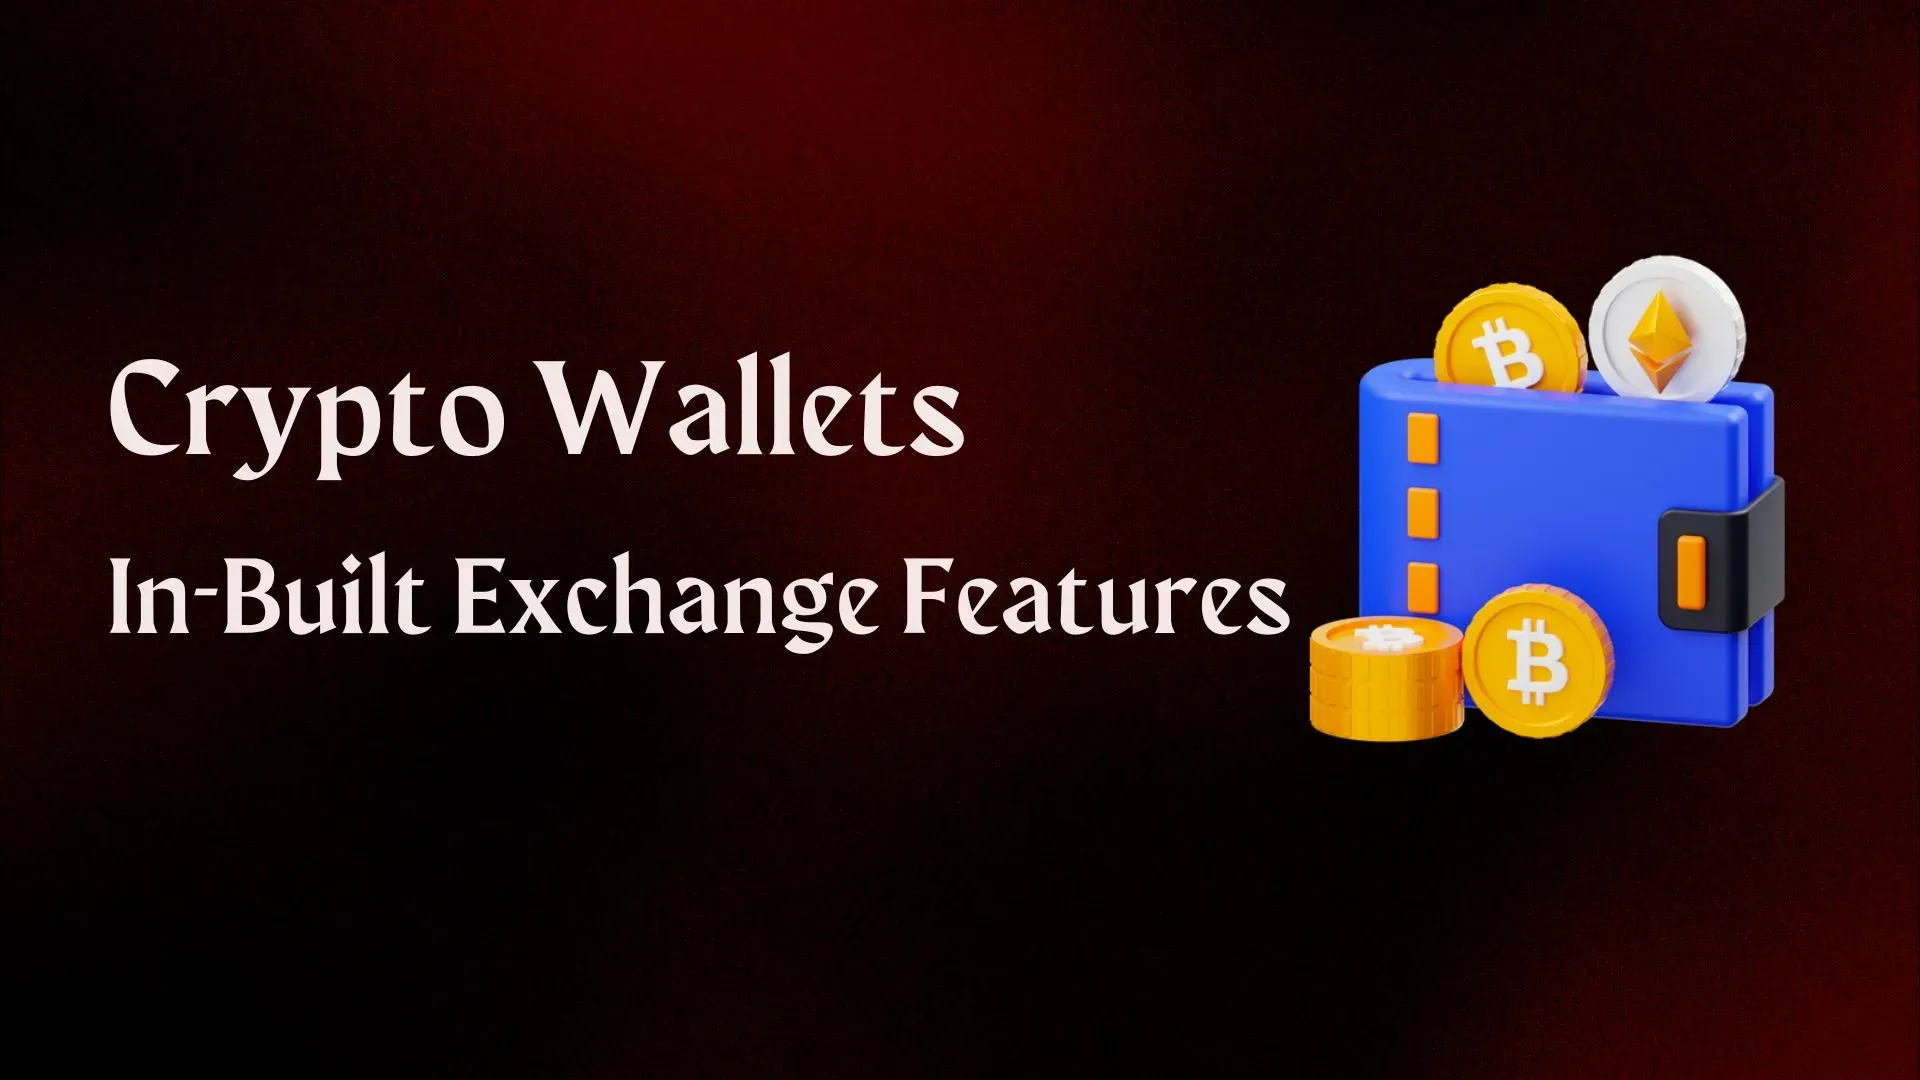 7 Crypto Wallets With In-Built Exchange Features In Asia